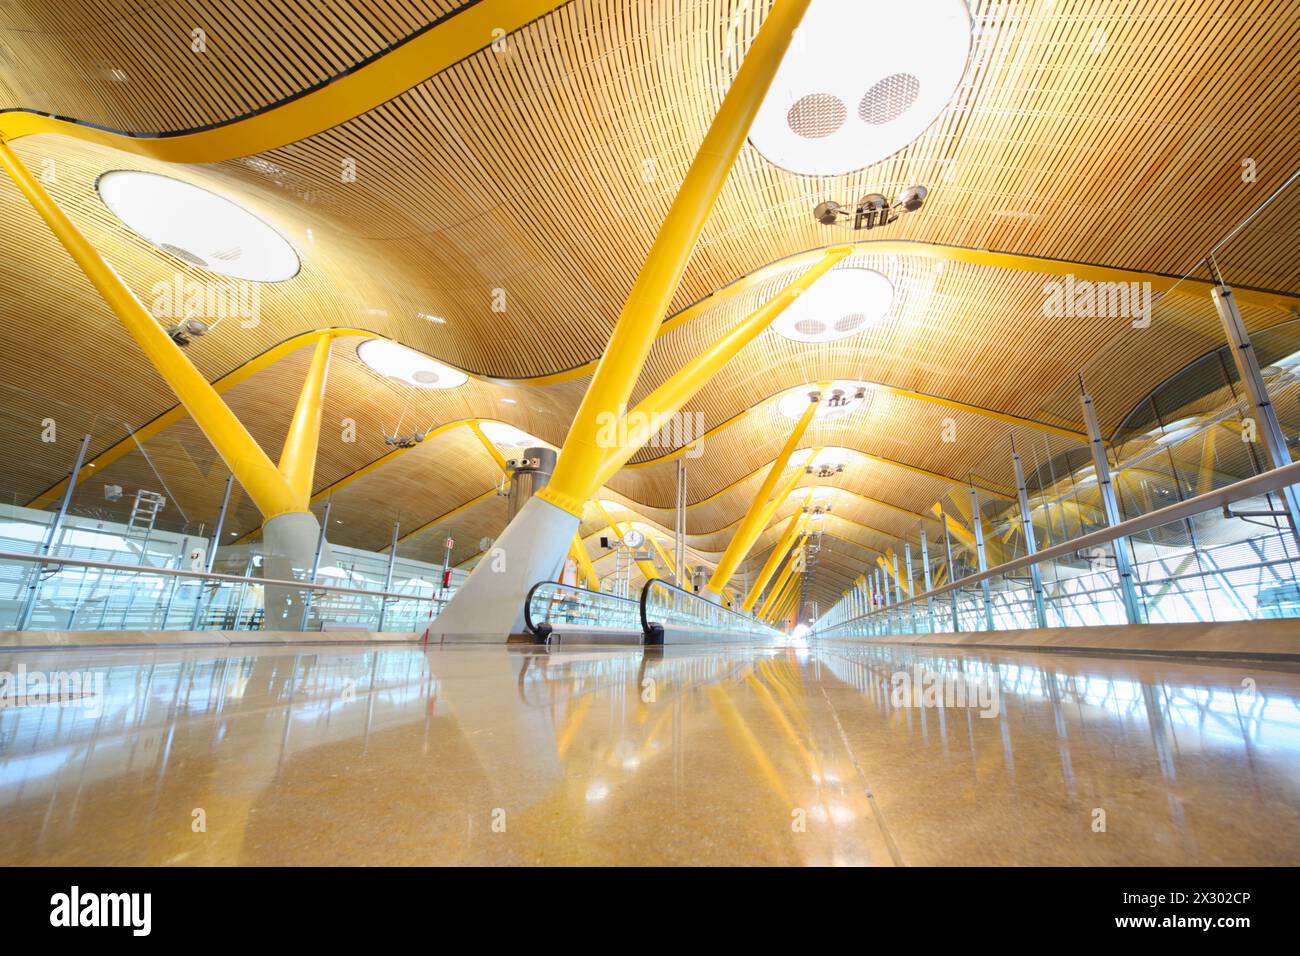 MADRID - MARCH 7: Light hall in Madrid Barajas Airport on March 7, 2012 in Madrid, Spain. Barajas - main airport of registry Spanish airline Iberia Ai Stock Photo